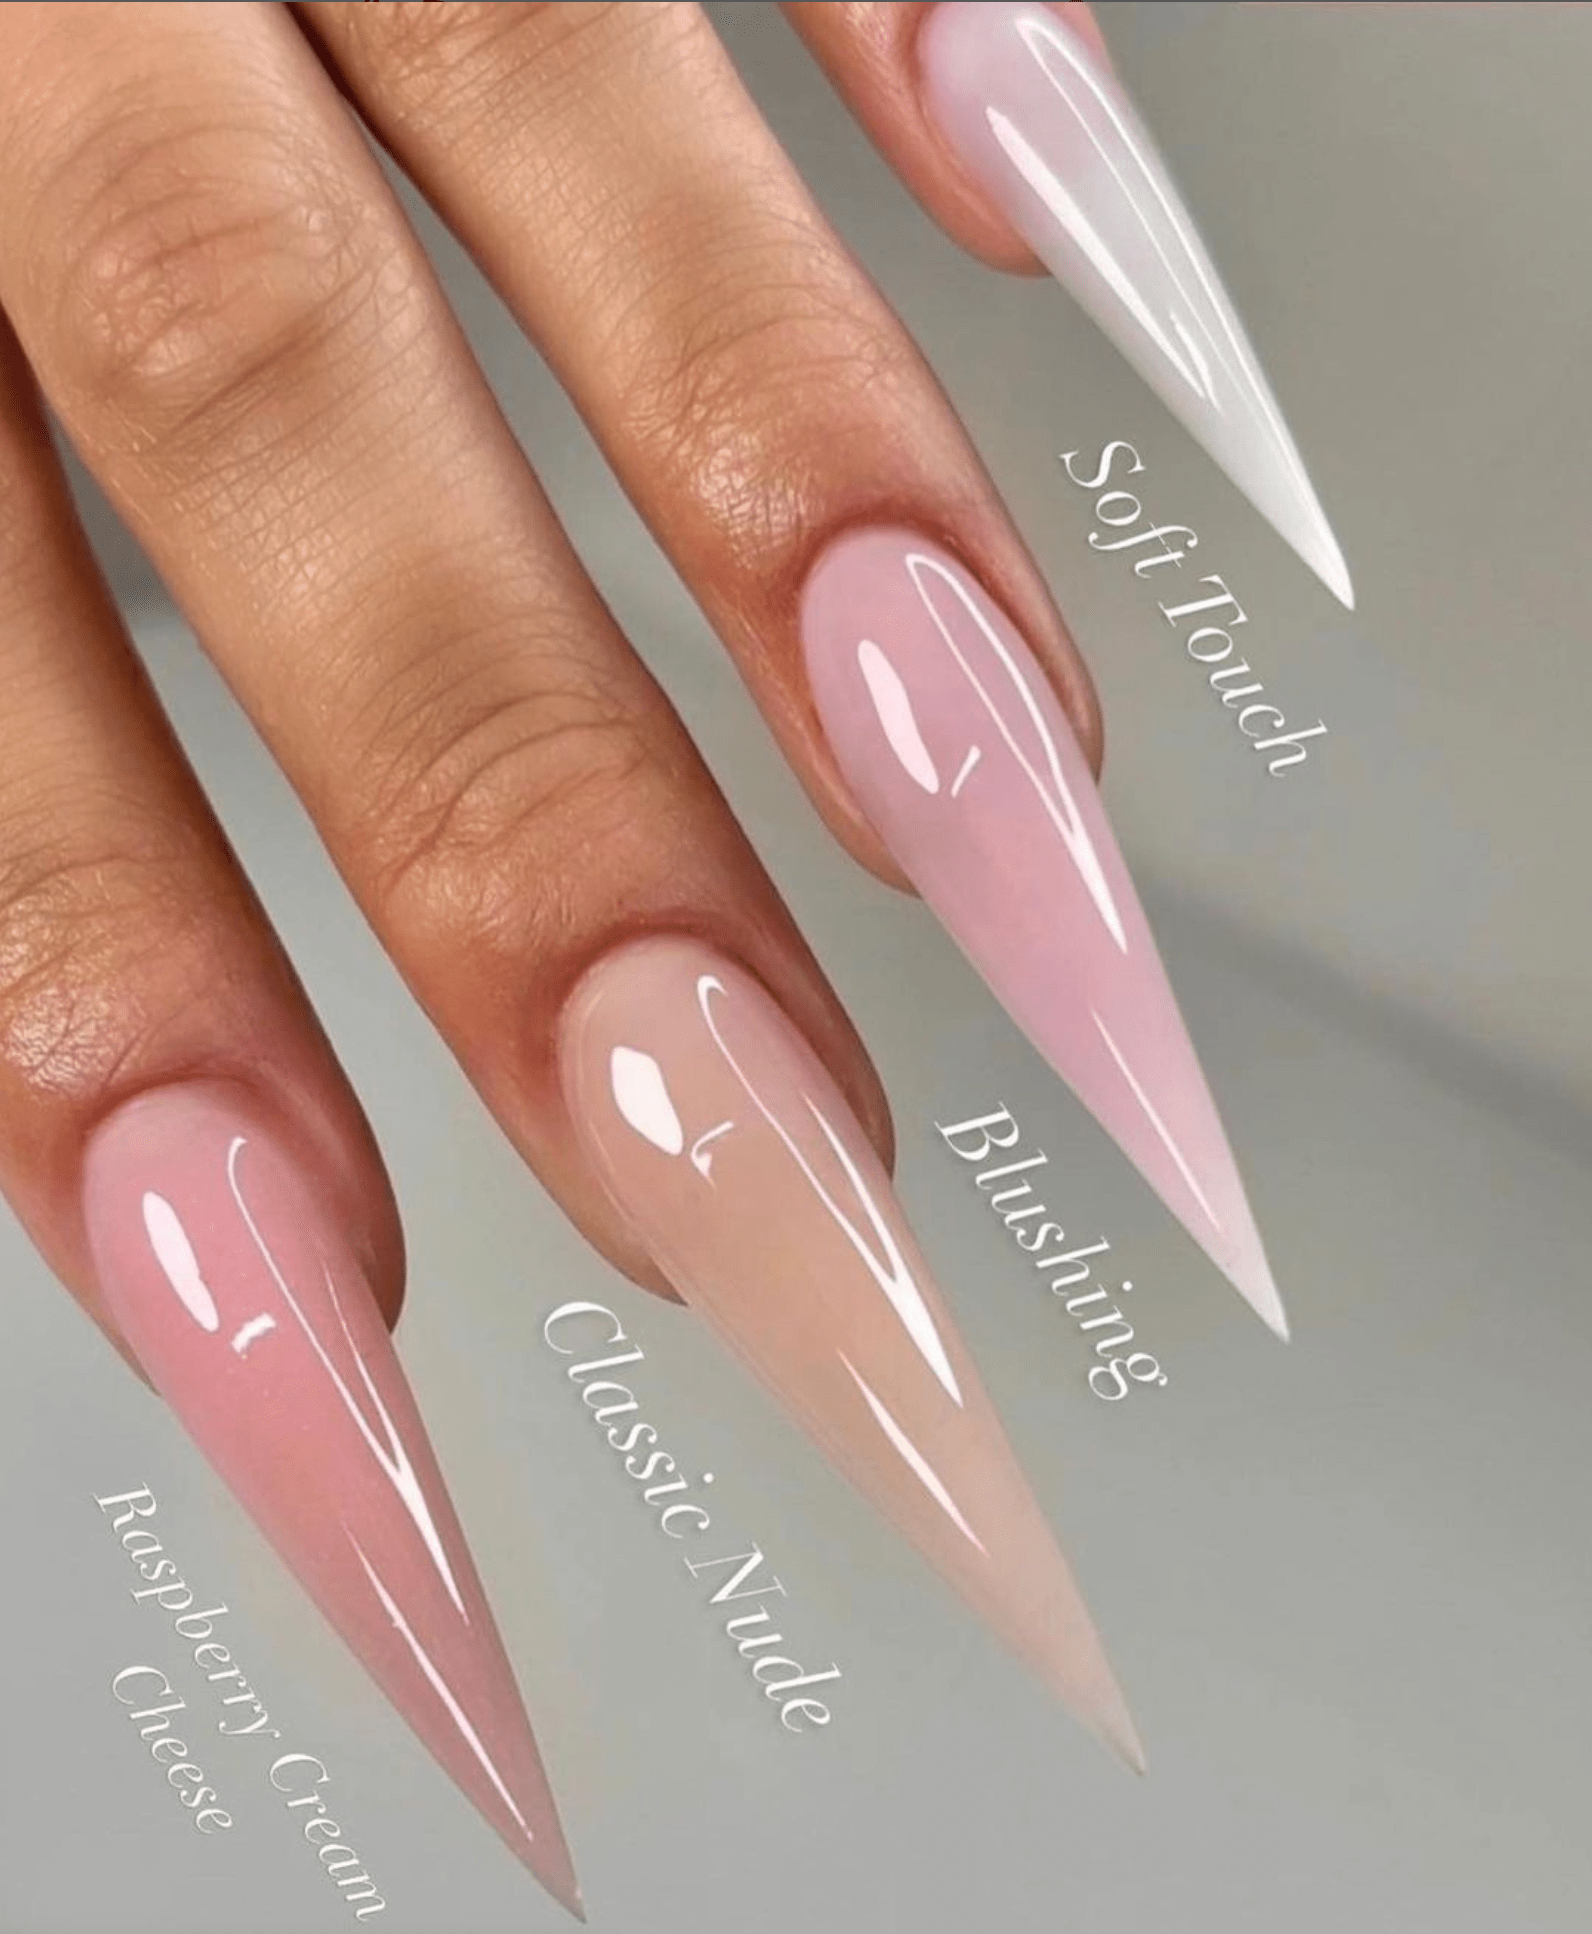 Classique Nails Beauty Supply | Beauty Supply Store in Toronto